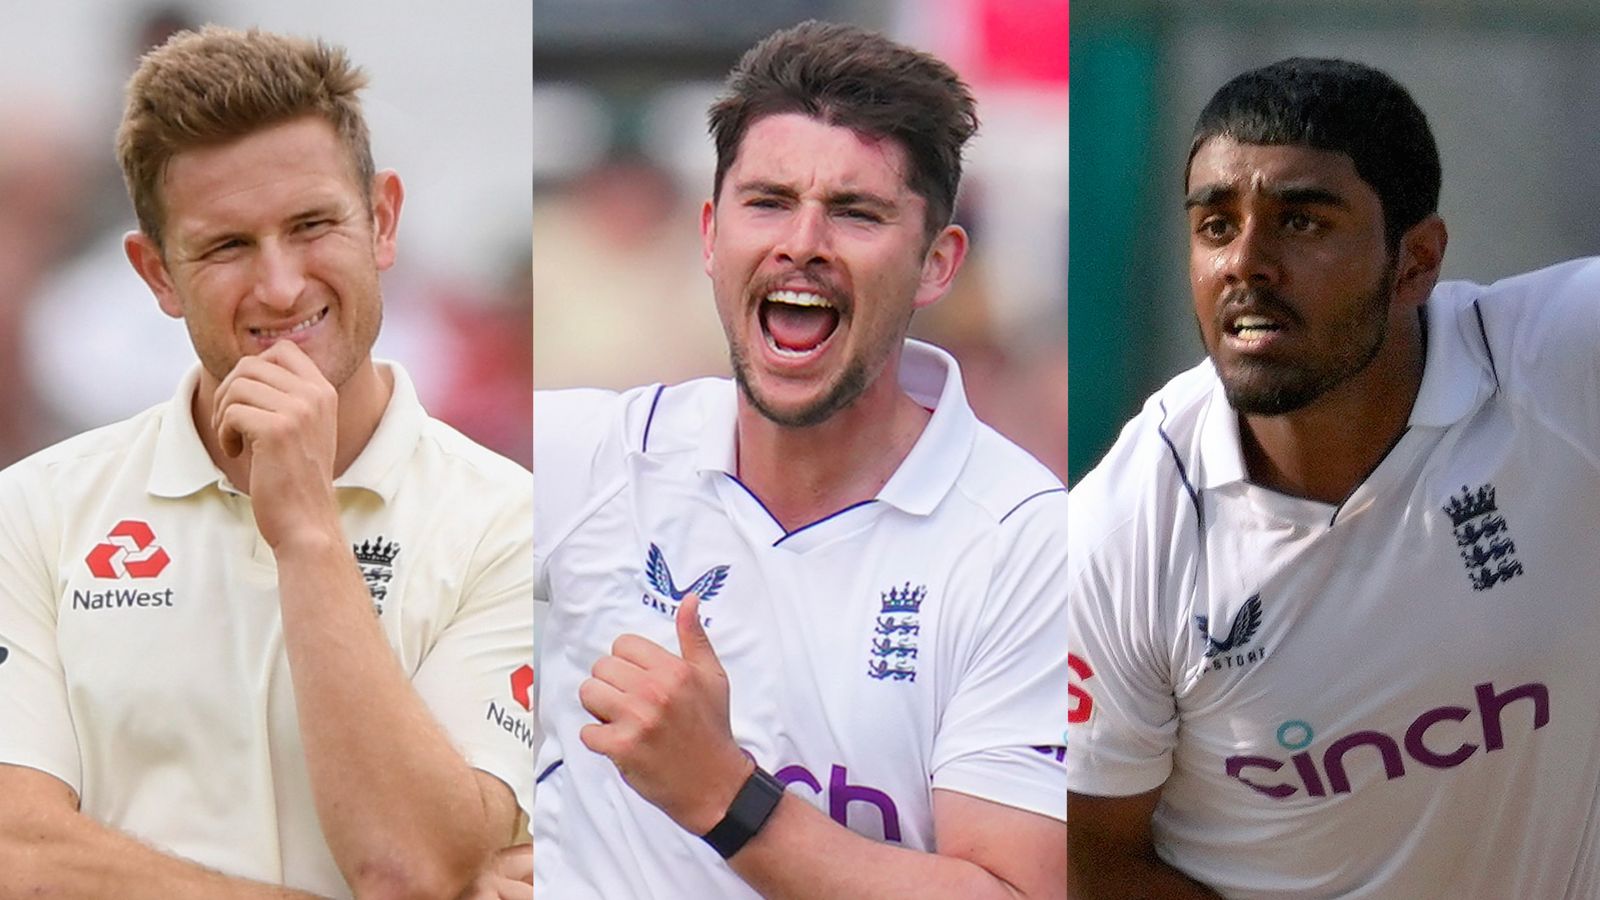 Michael Atherton: How will England replace Jack Leach? Liam Dawson or four seamers?